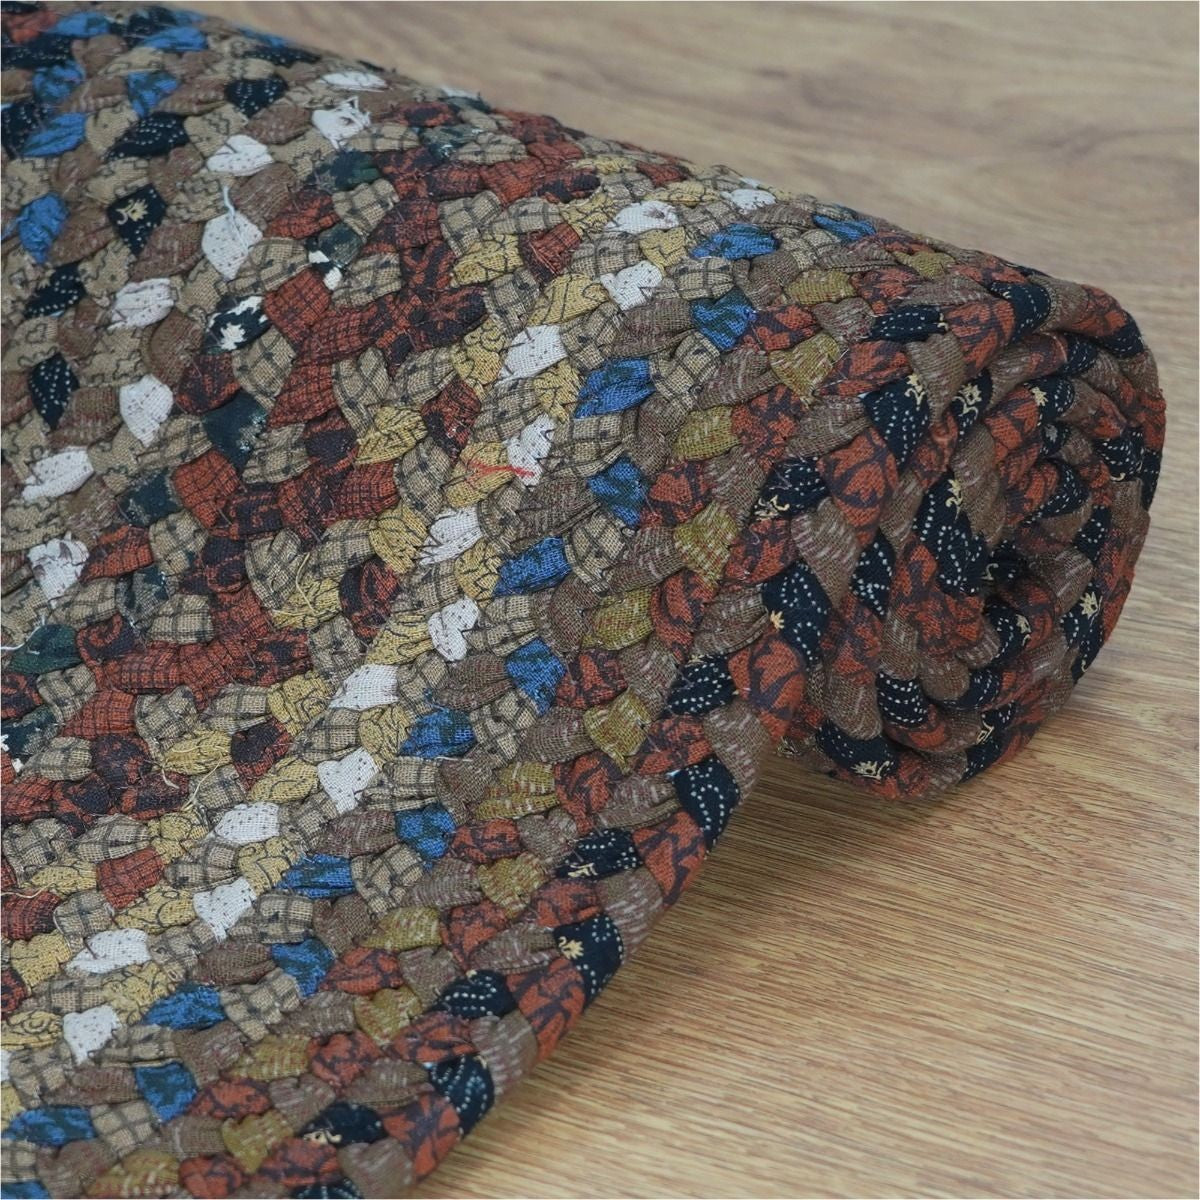 Biscotti Brown Cotton Oval Braided Rugs –